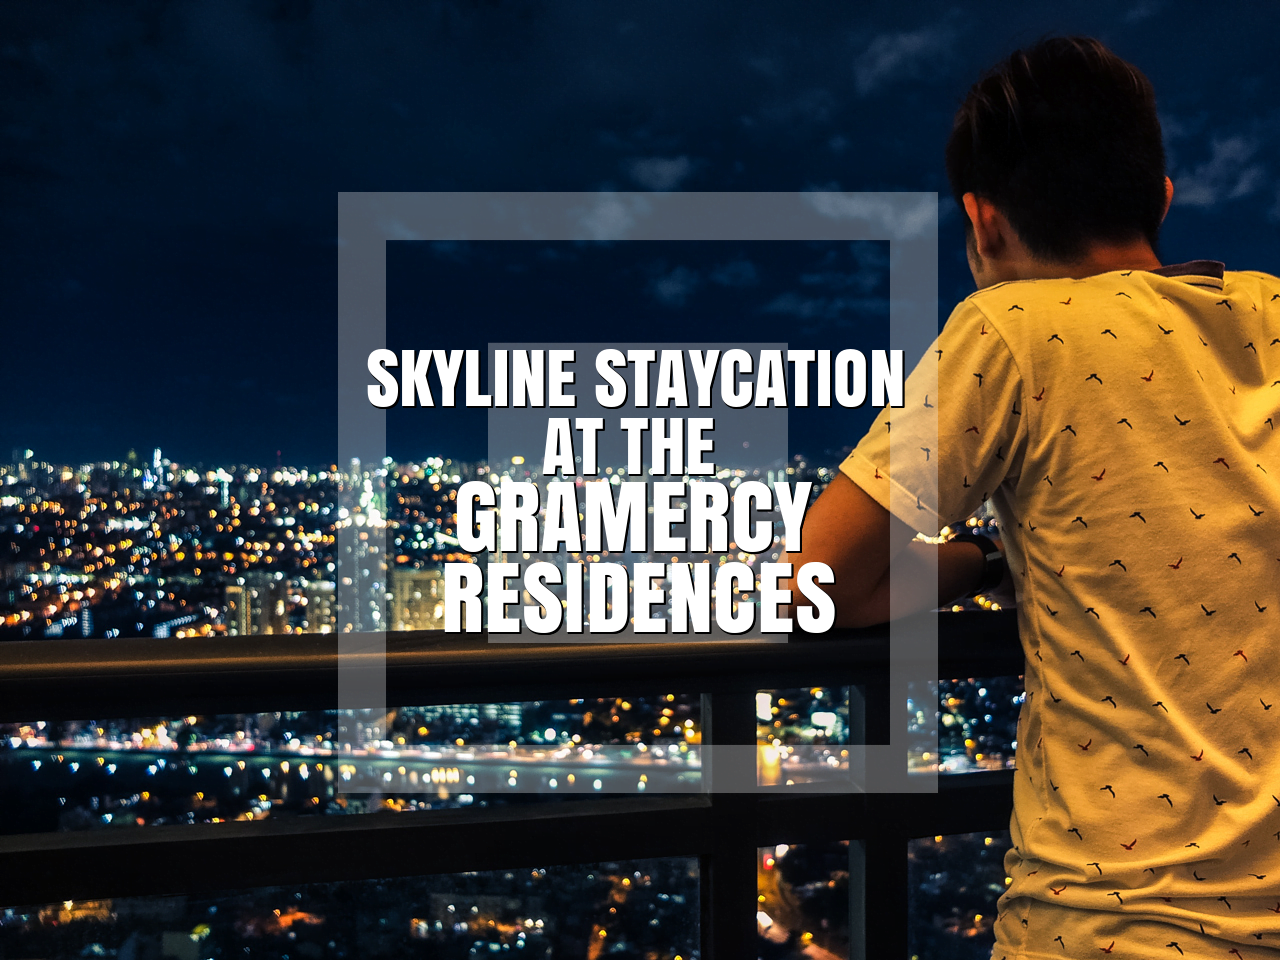 Skyline Staycation at The Gramercy Residences (and How to Book)